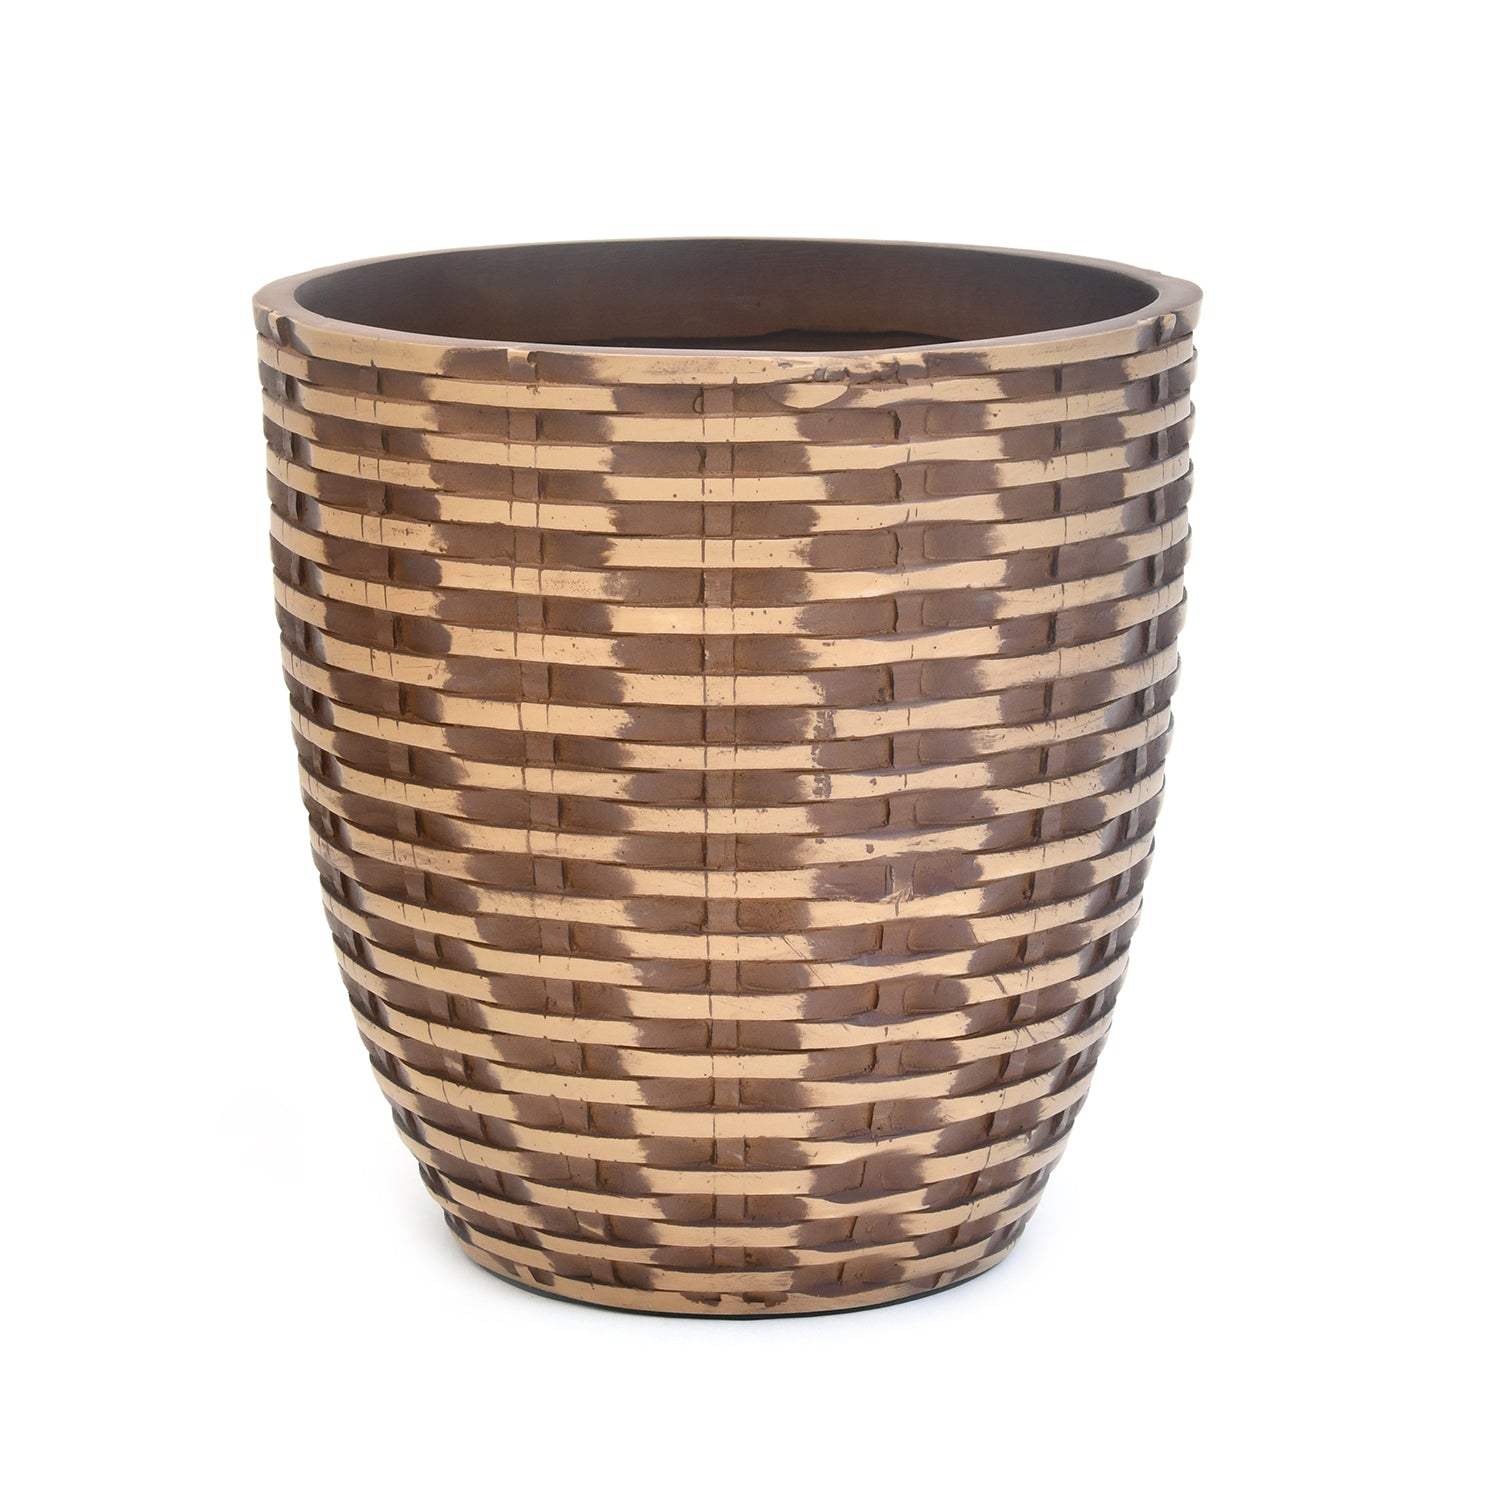 Weave Small Planter (Brown & Beige)